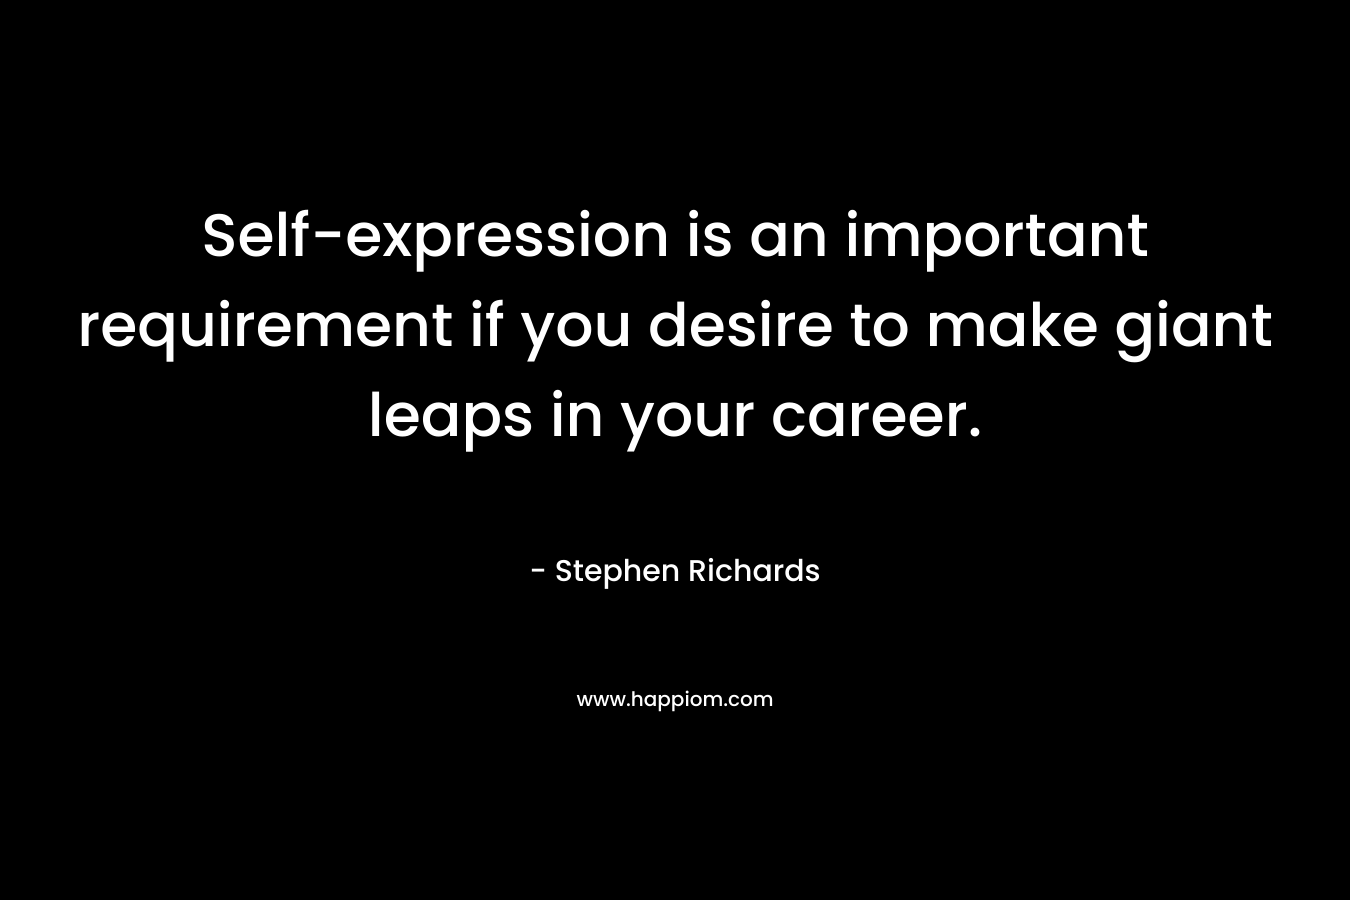 Self-expression is an important requirement if you desire to make giant leaps in your career.